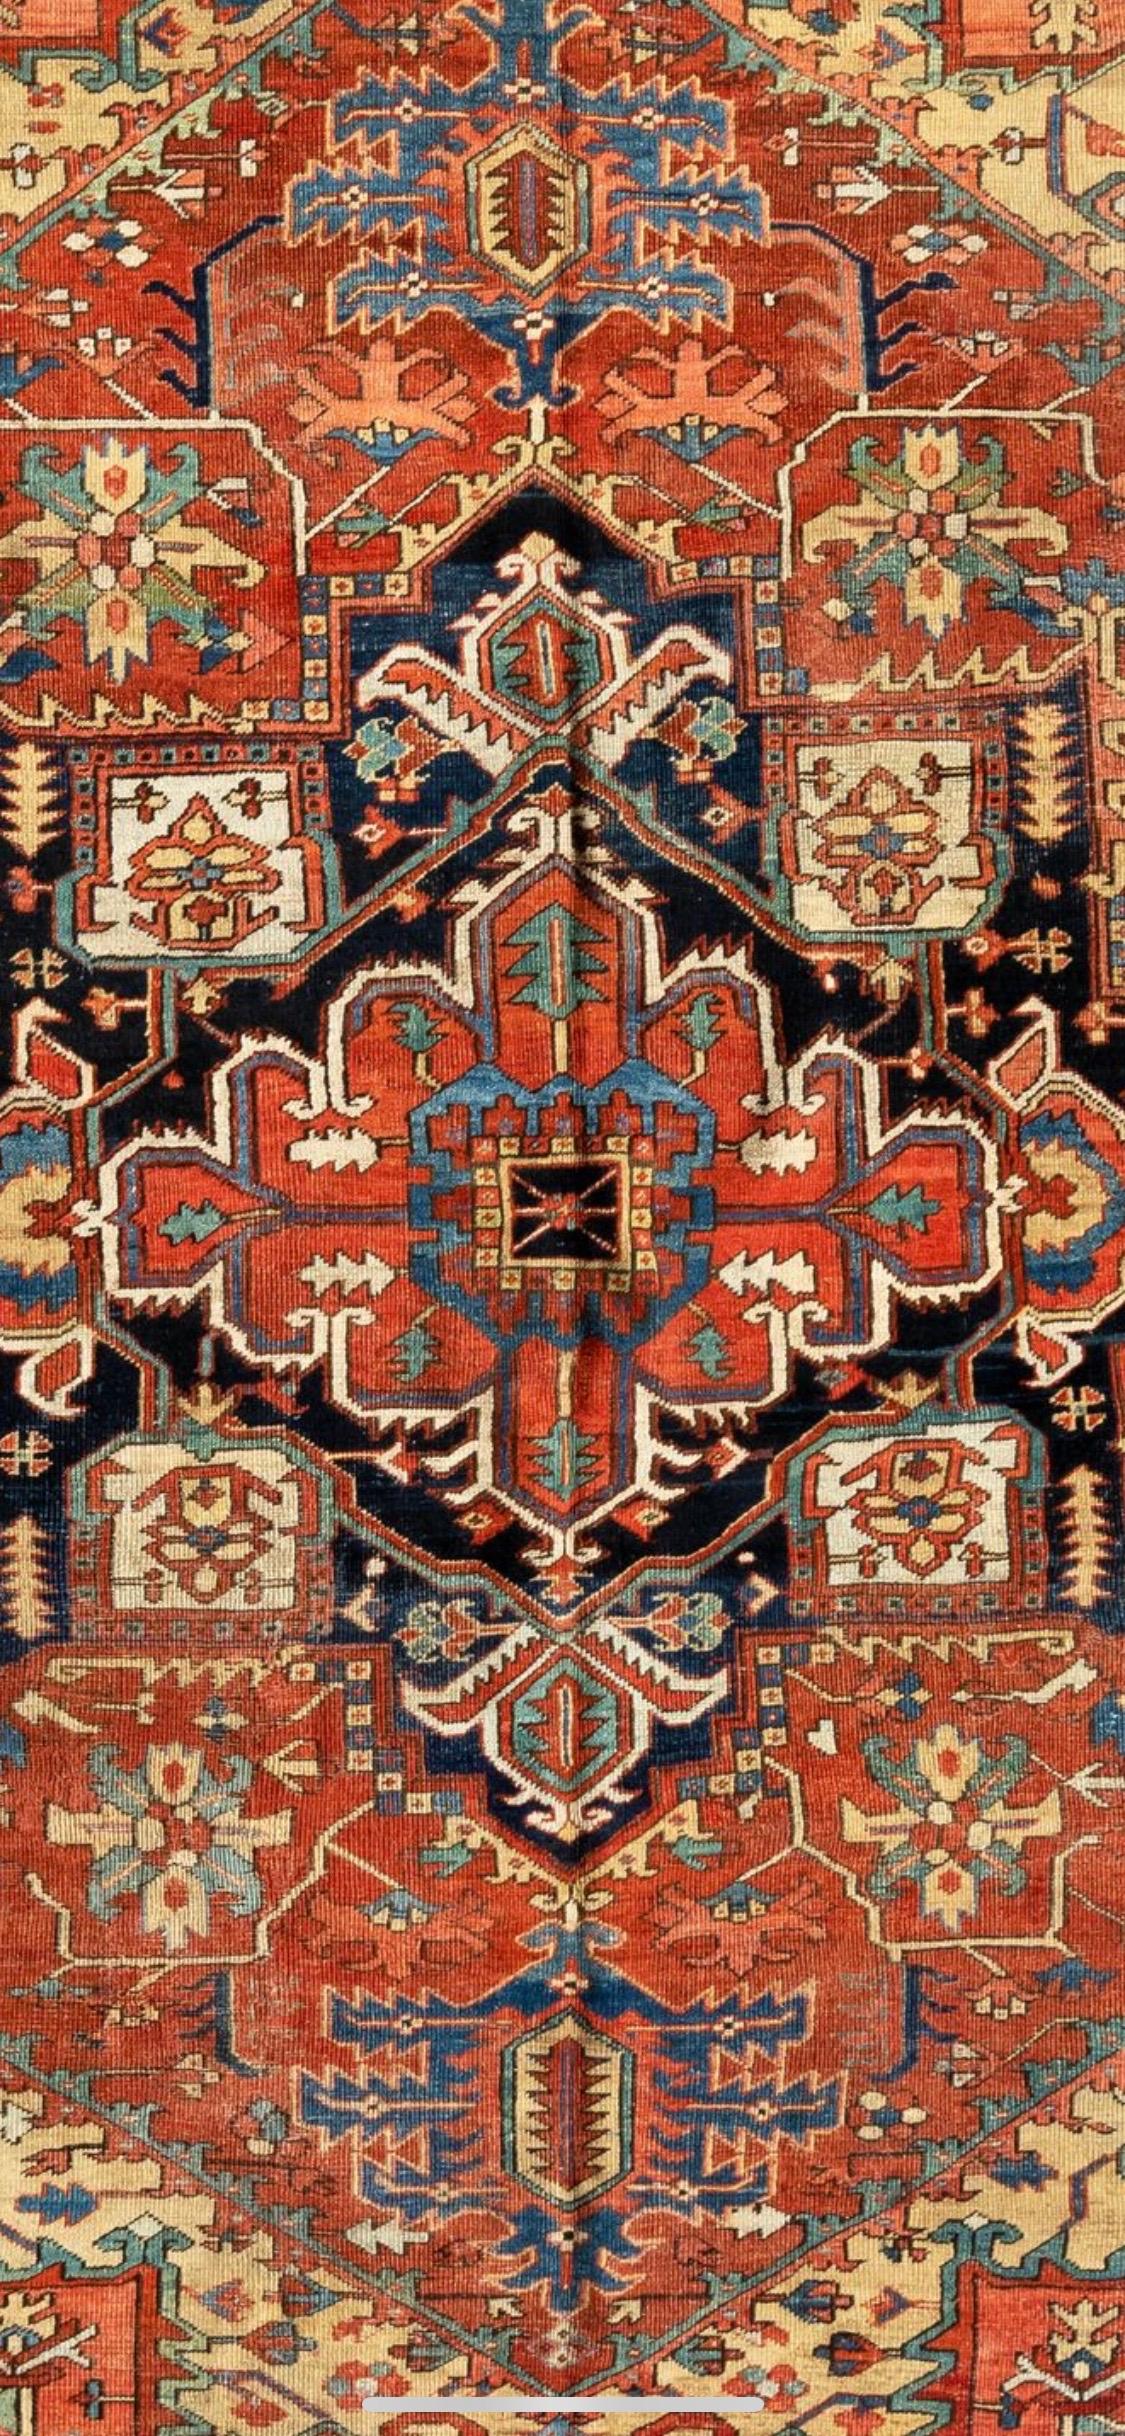 Heriz rugs are one of the most famous rugs from Iran, because of their very unique and distinguishable style. Heriz is a city located in northwestern Iran, near the city of Tabriz, which is a major rug-weaving center in Iran. Most often, Heriz rugs